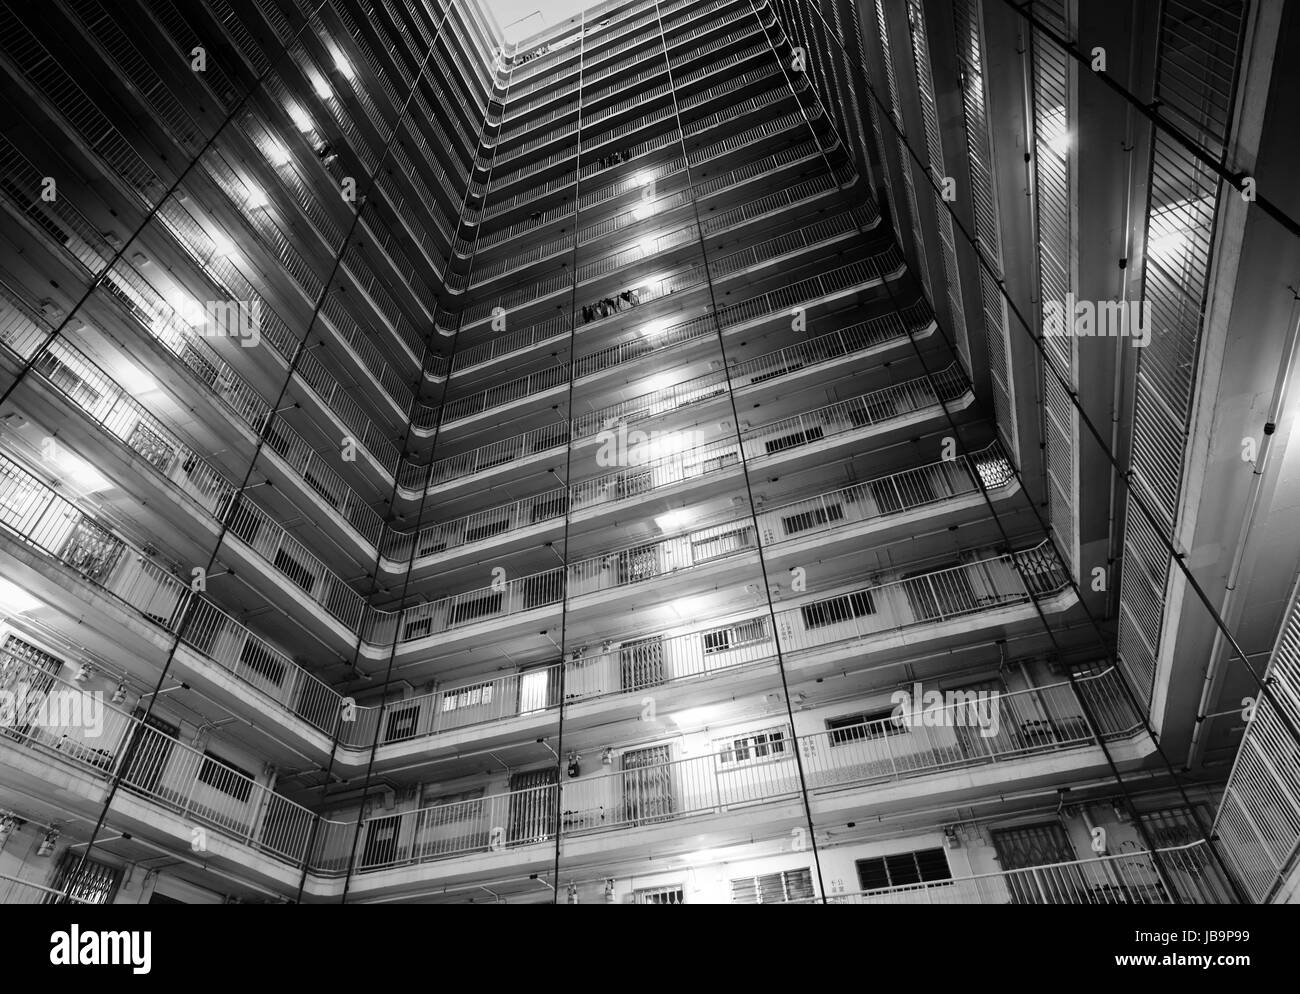 Typical public housing in Hong Kong Stock Photo - Alamy